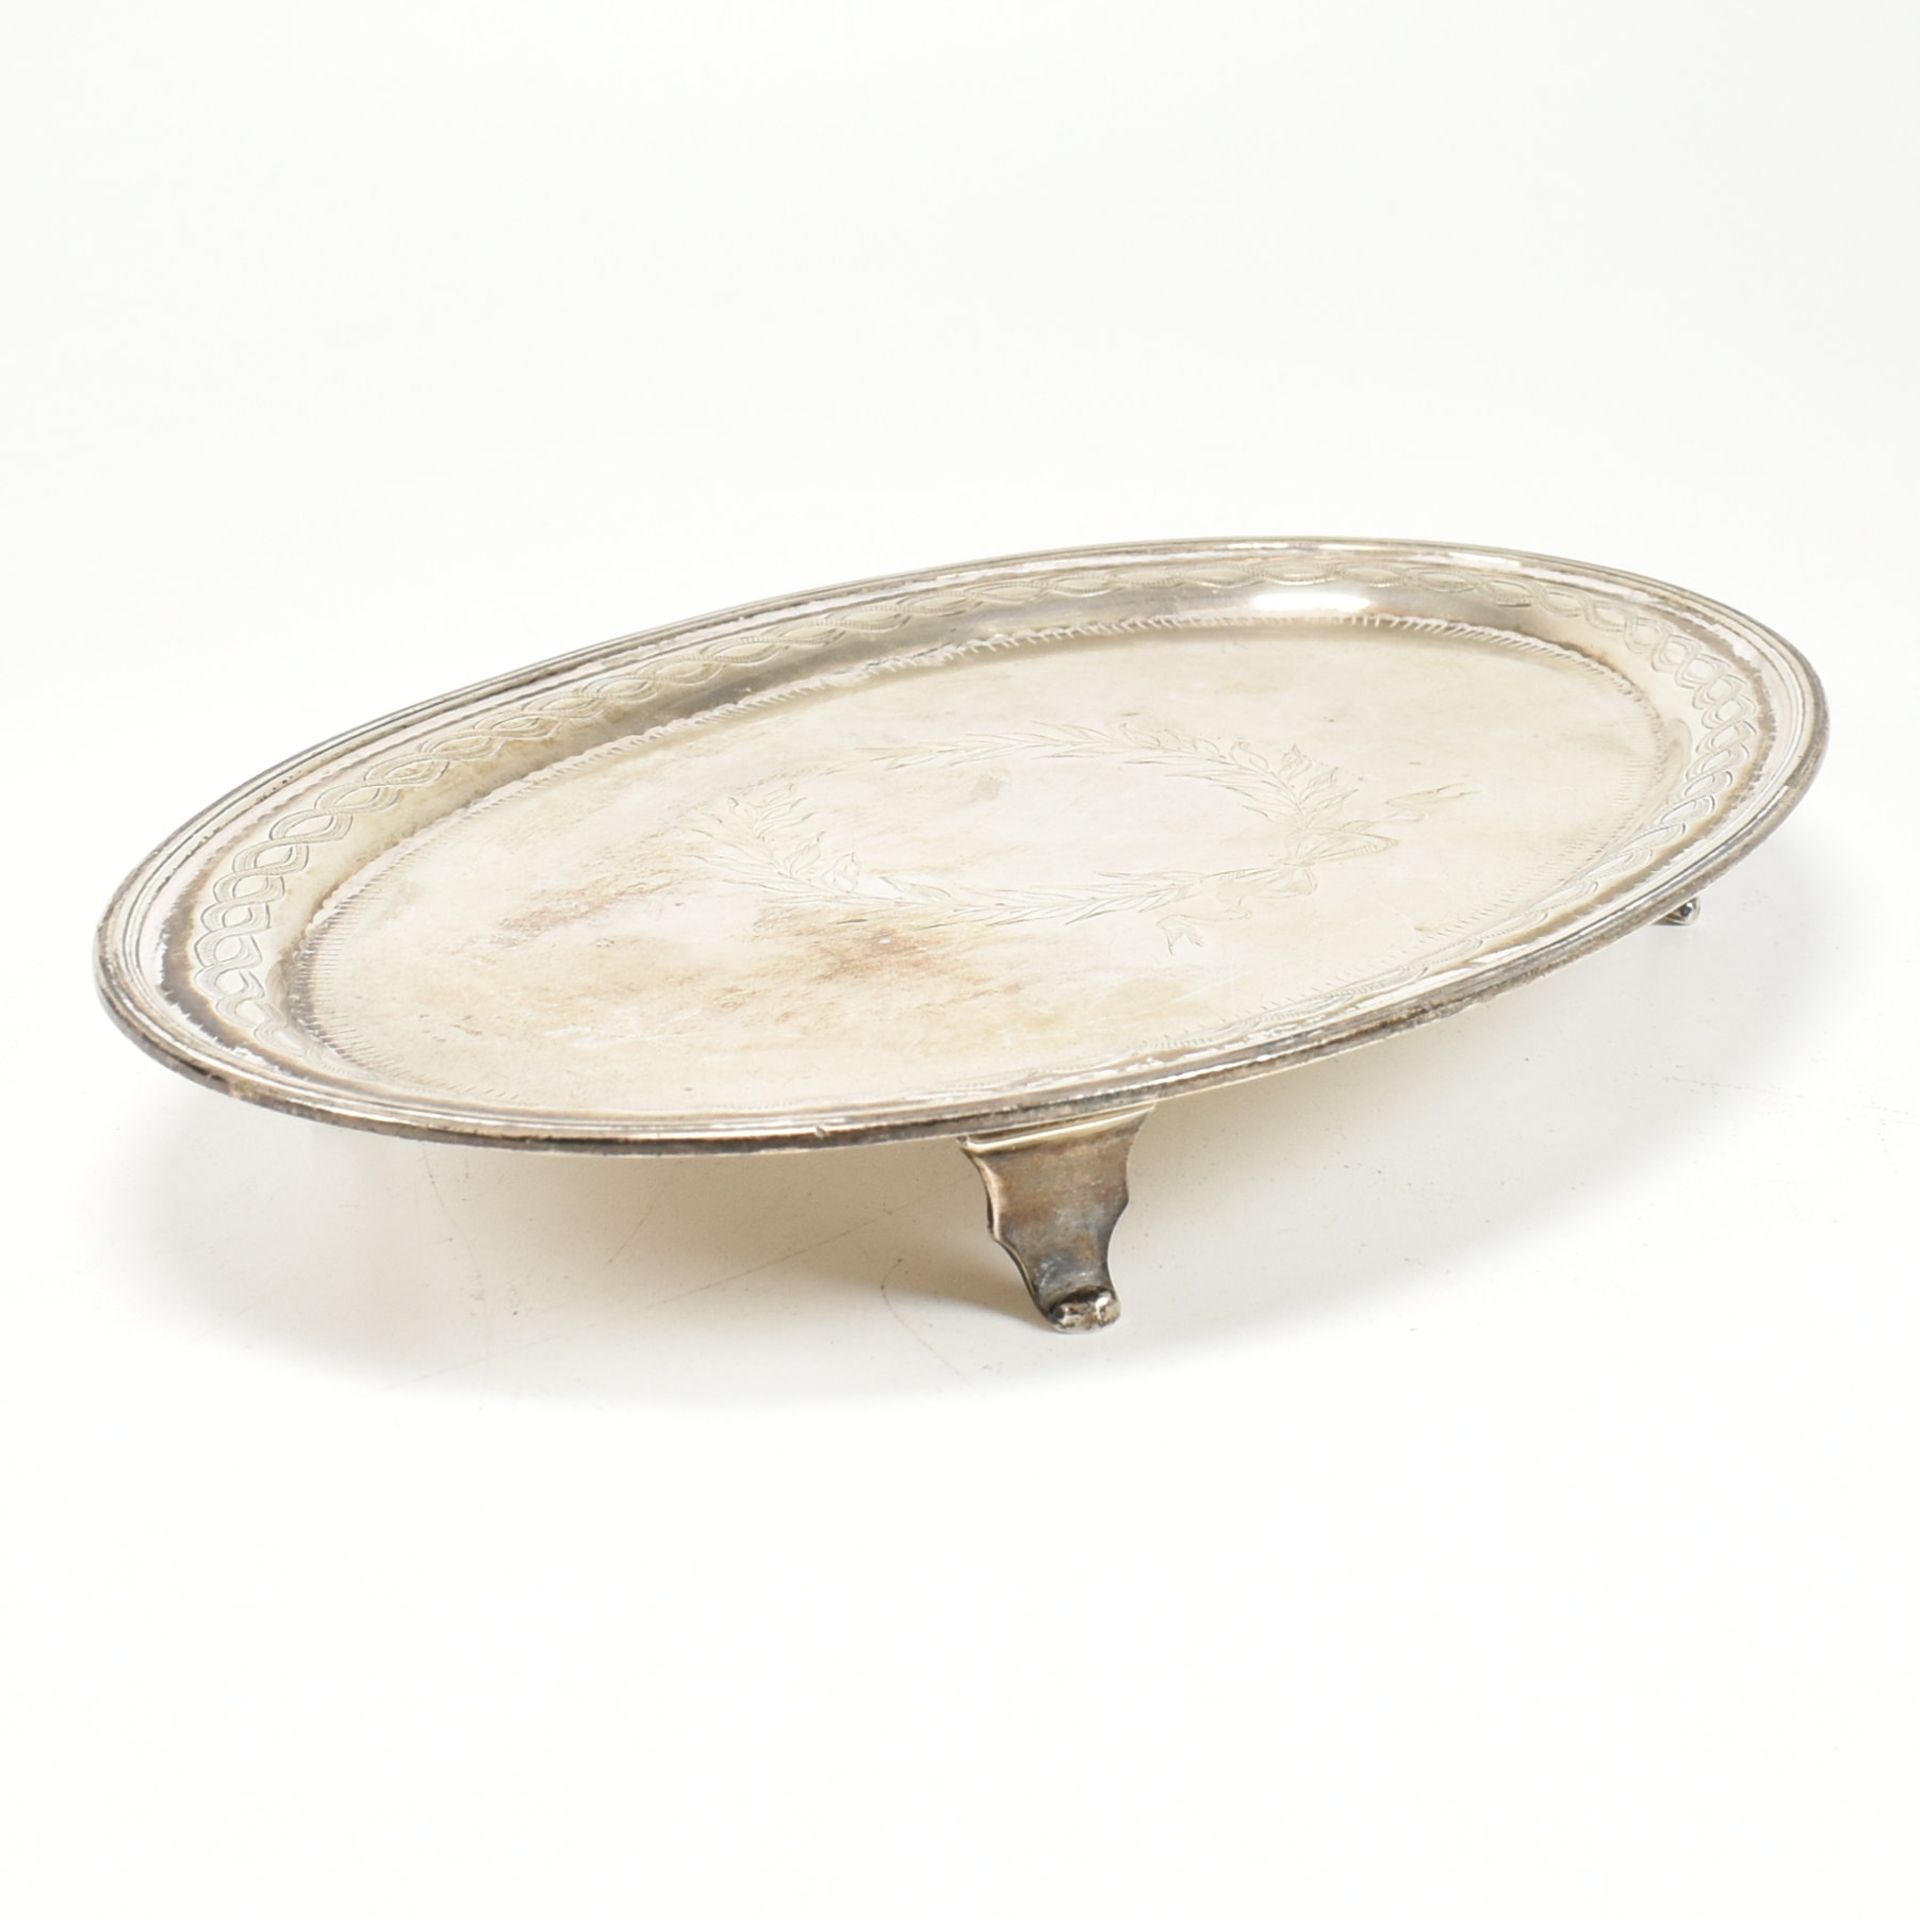 GEORGE V HALLMARKED SILVER TRAY - Image 3 of 8